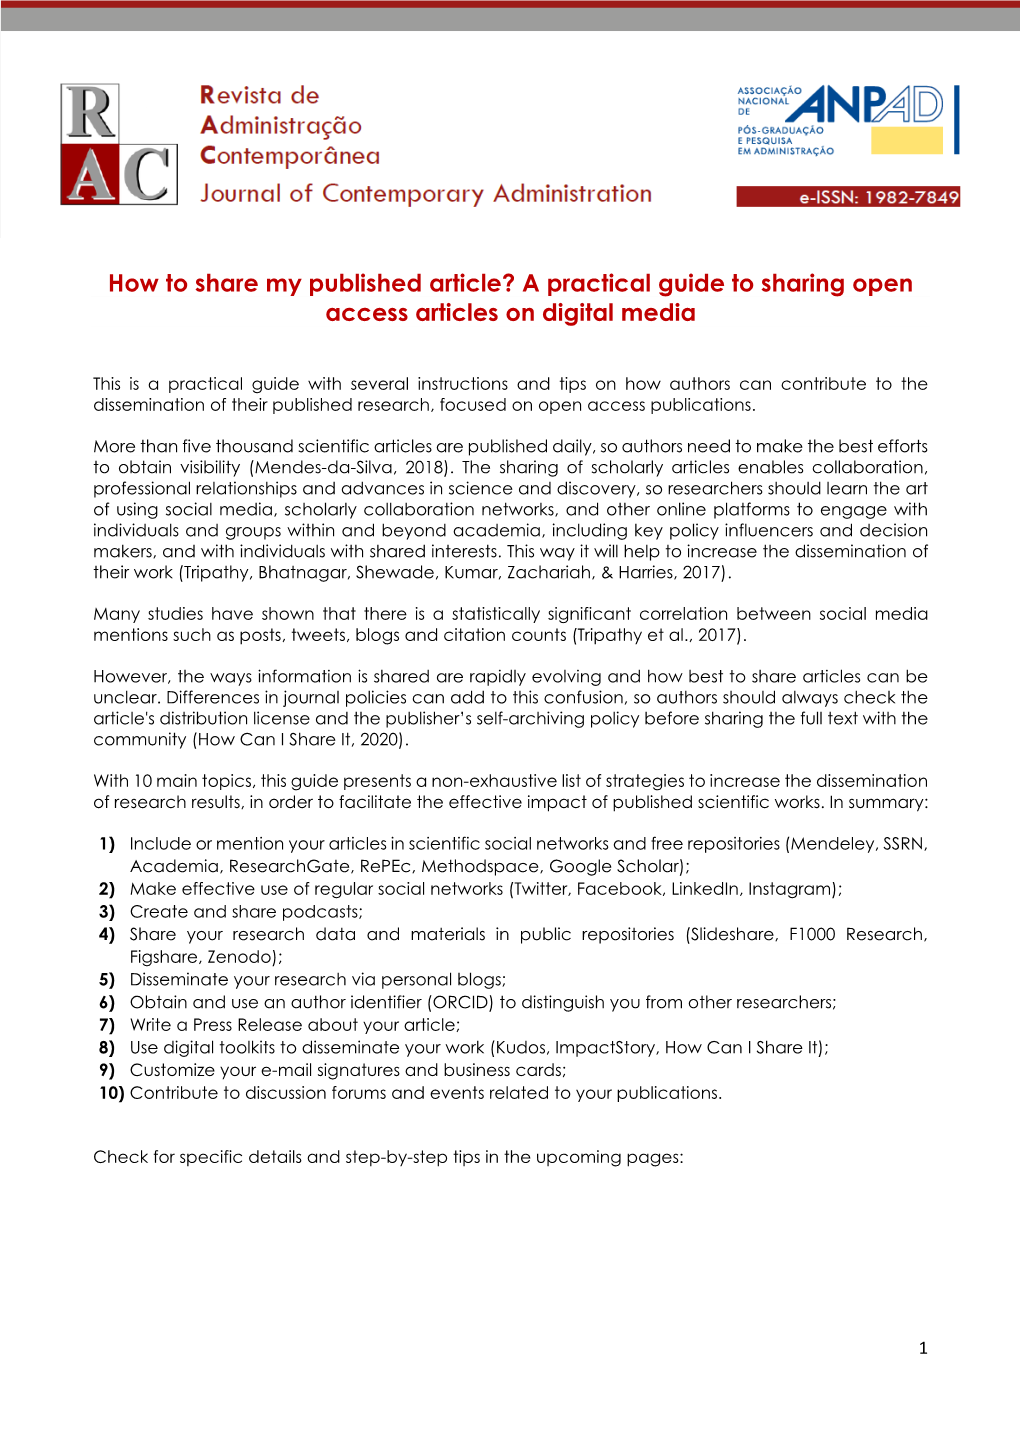 How to Share My Published Article? a Practical Guide to Sharing Open Access Articles on Digital Media